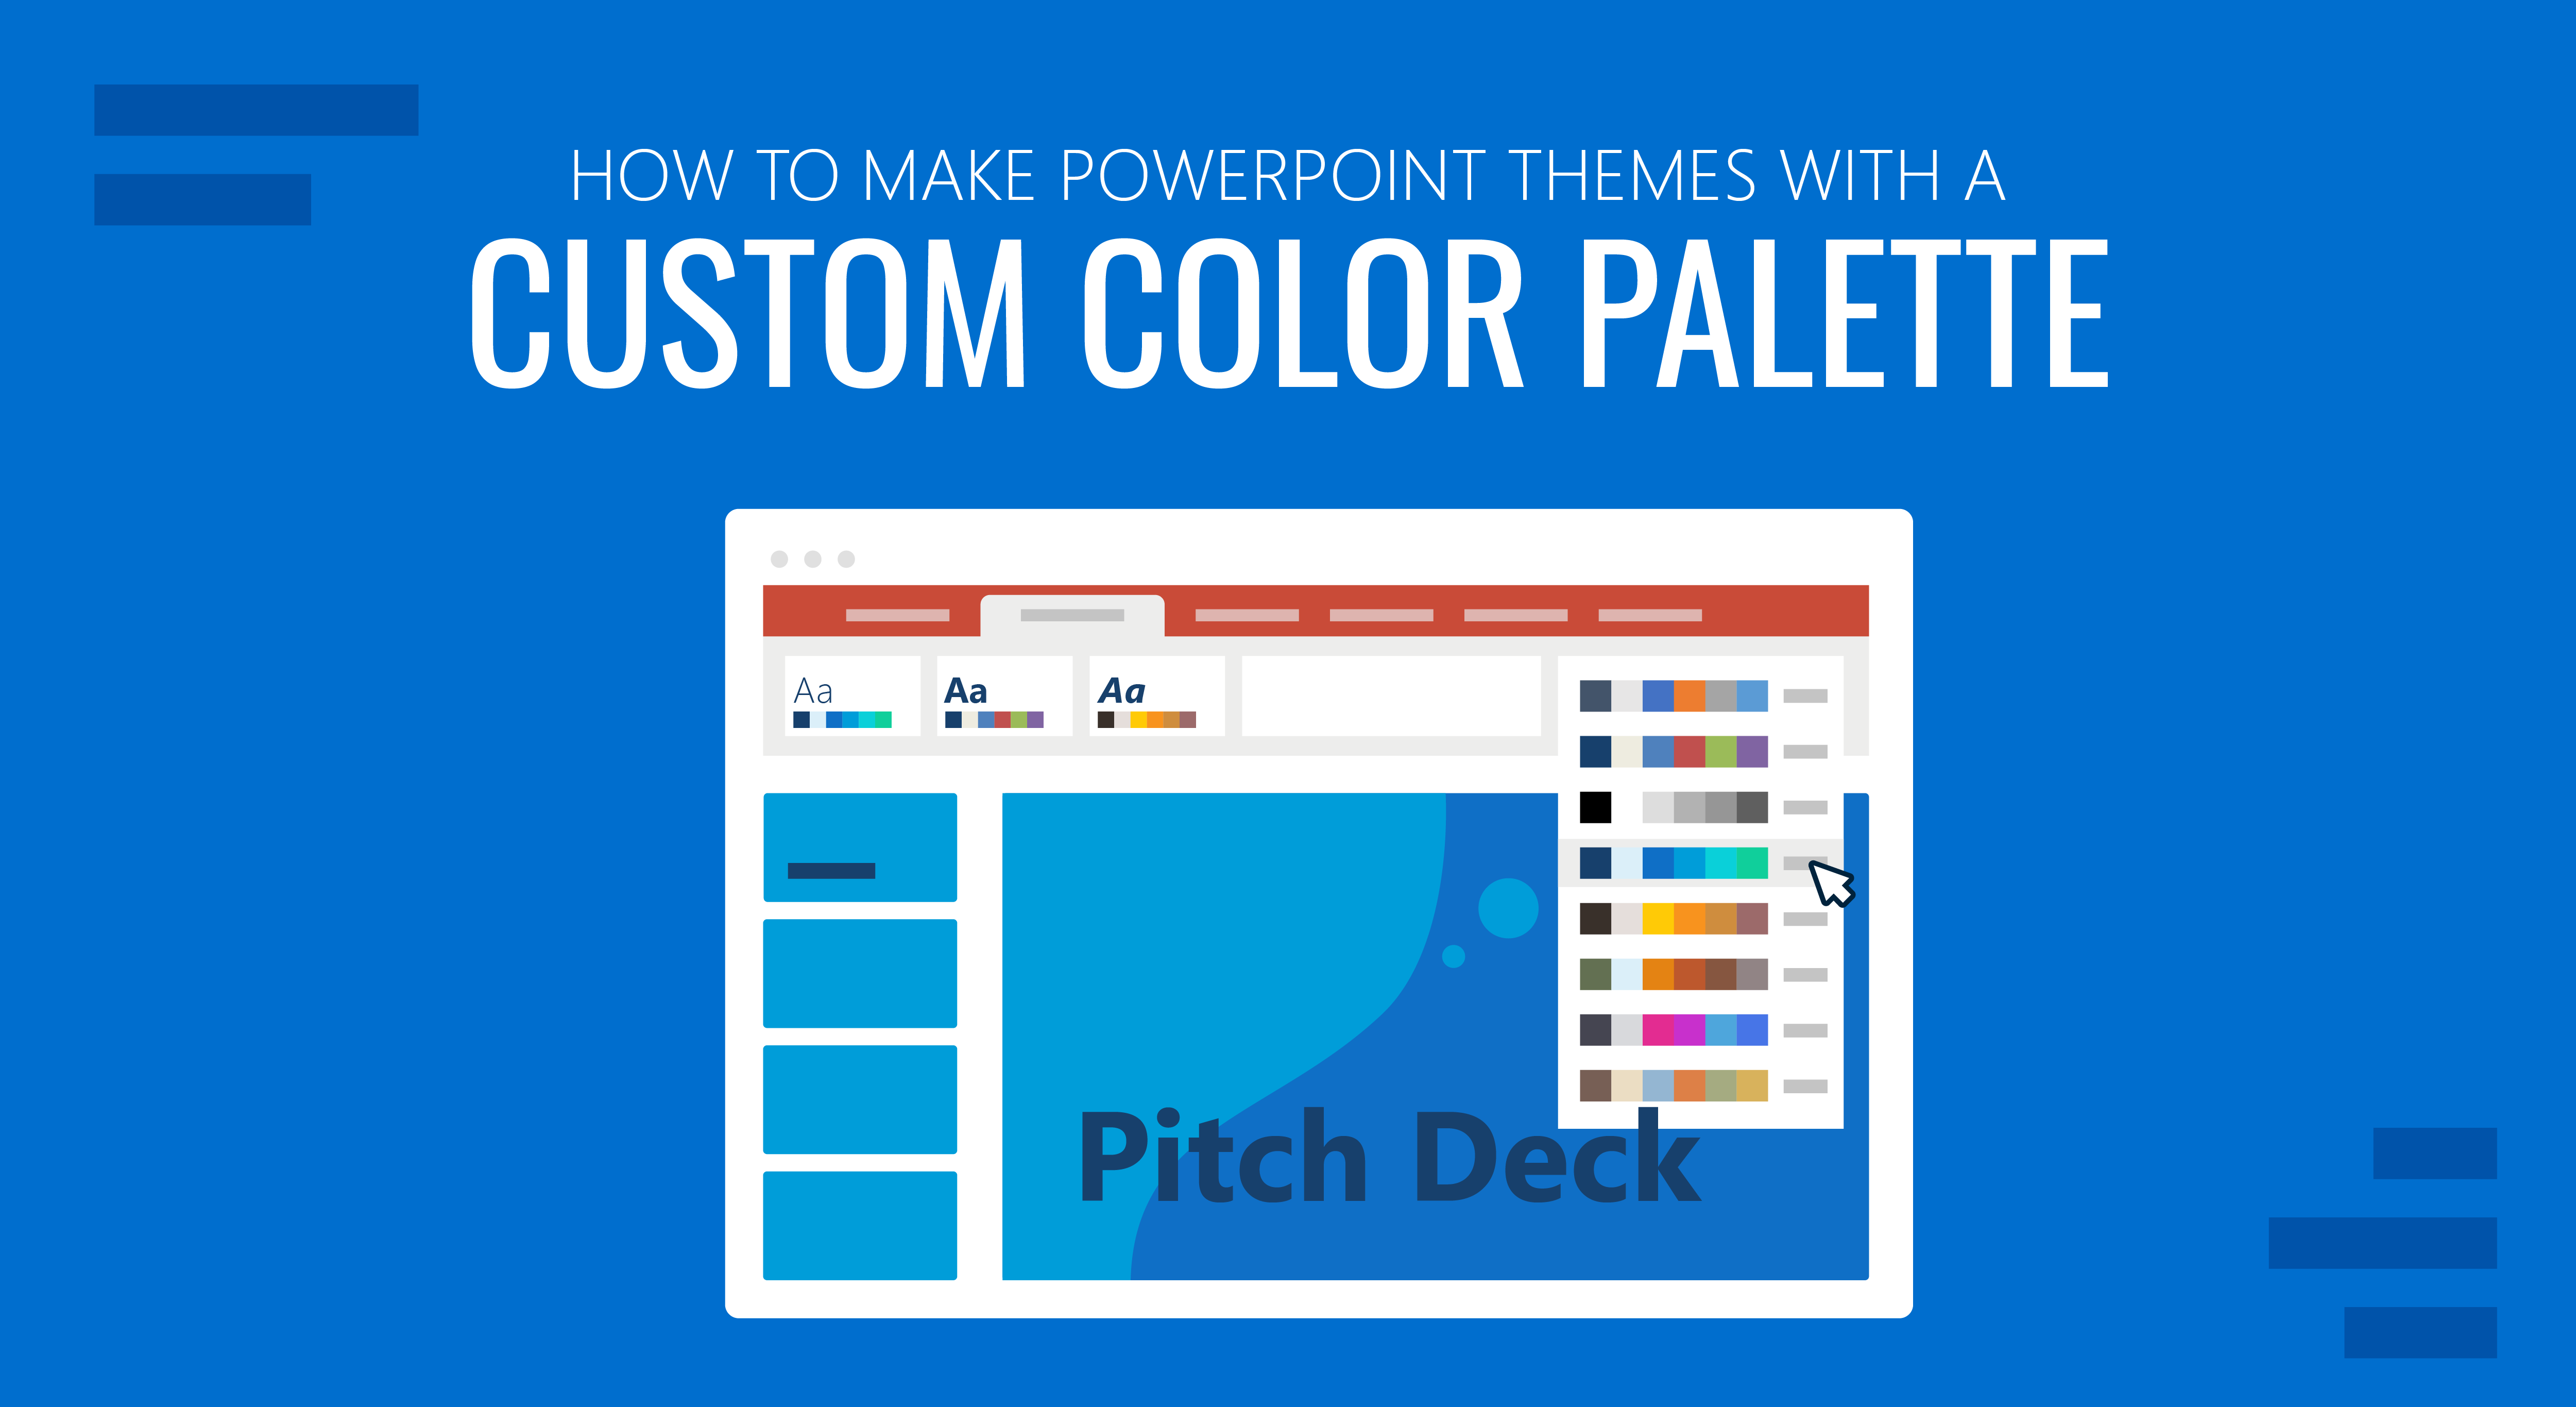 How to Use Theme Colors in PowerPoint with a Custom Palette